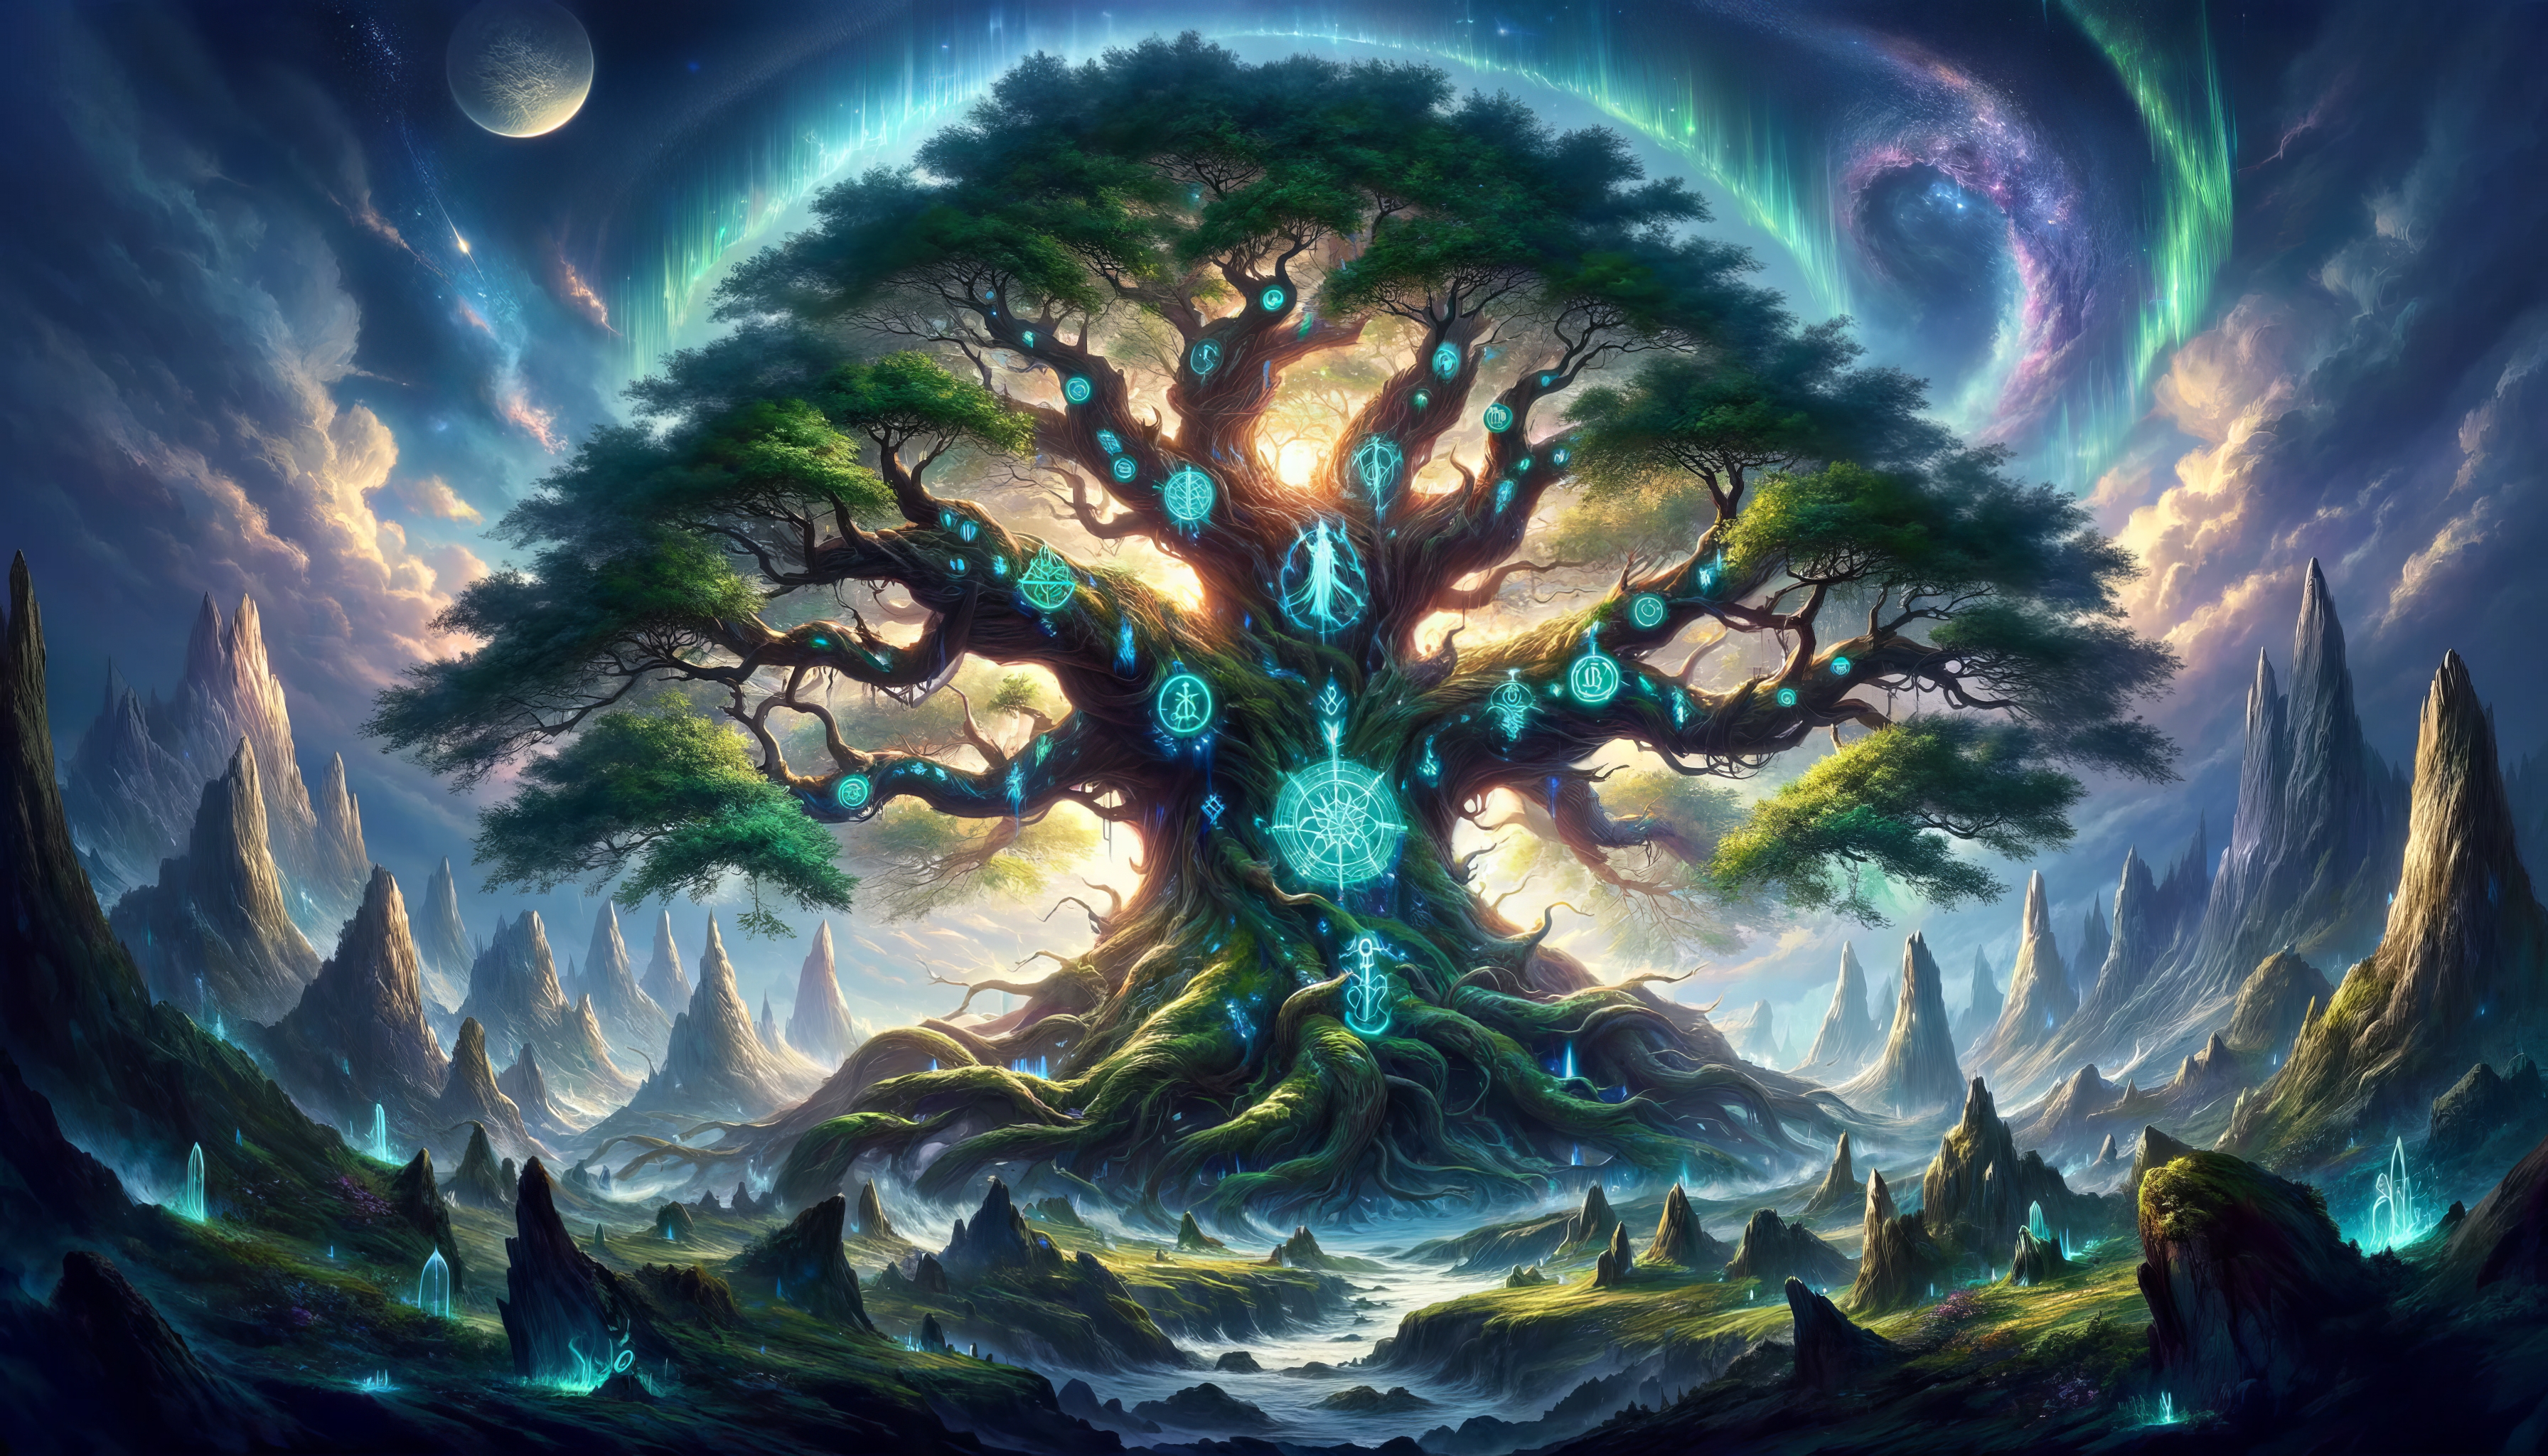 Fantasy HD wallpaper of the mythical Yggdrasil tree with vibrant colors and mystical landscape for desktop background.